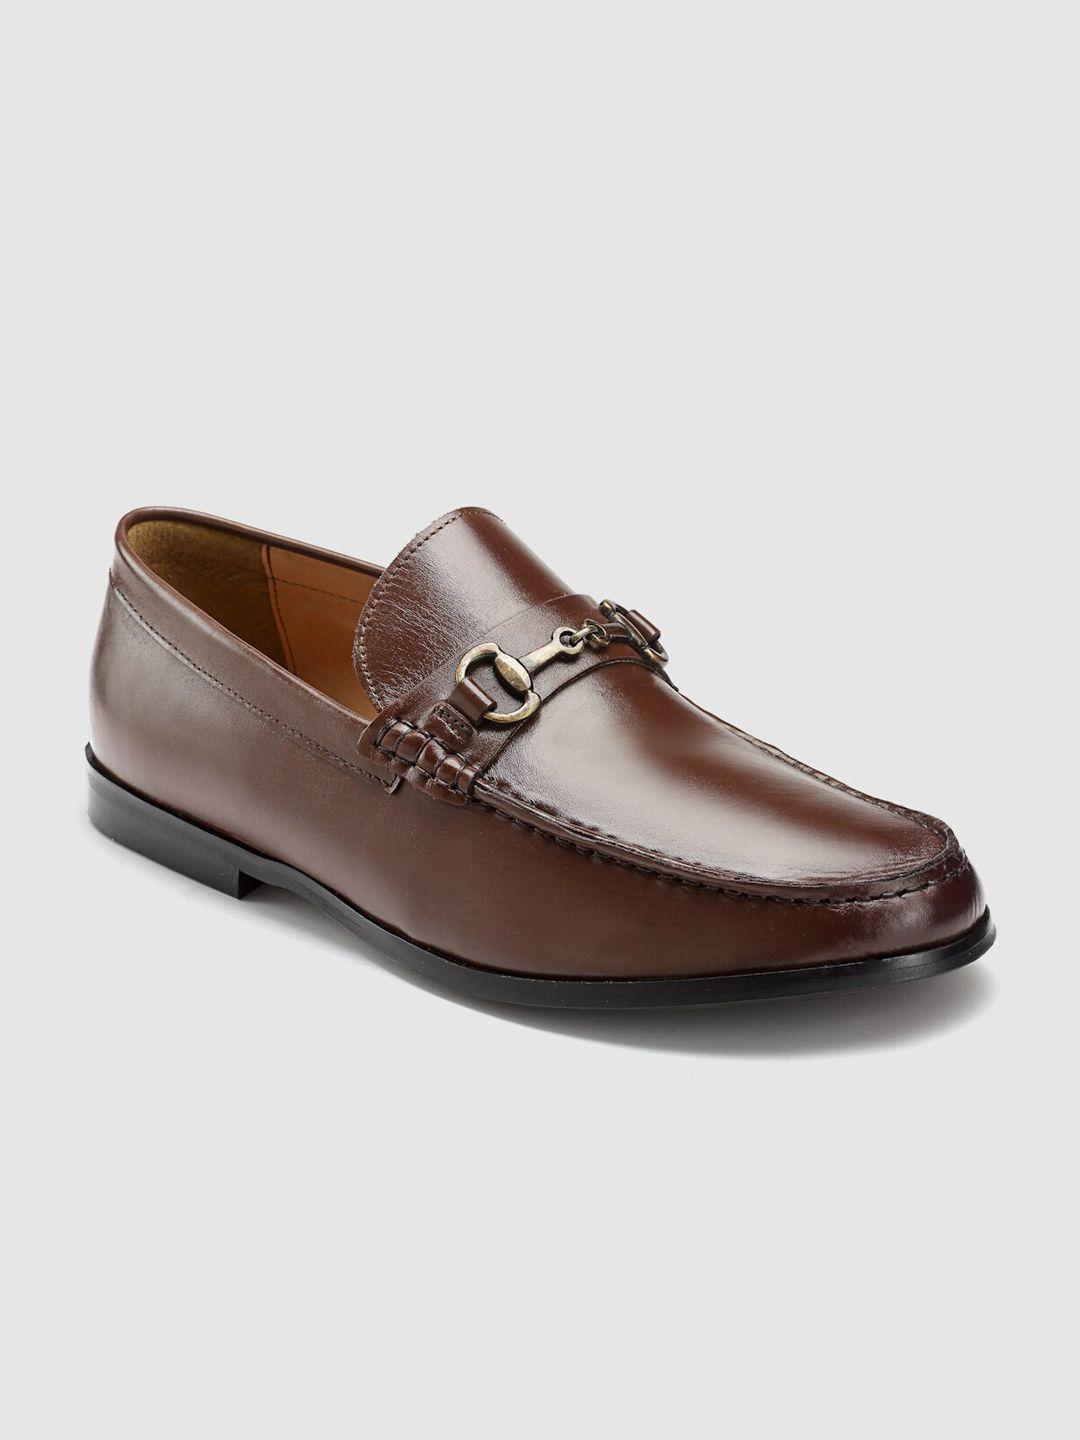 hats off accessories men textured leather loafers